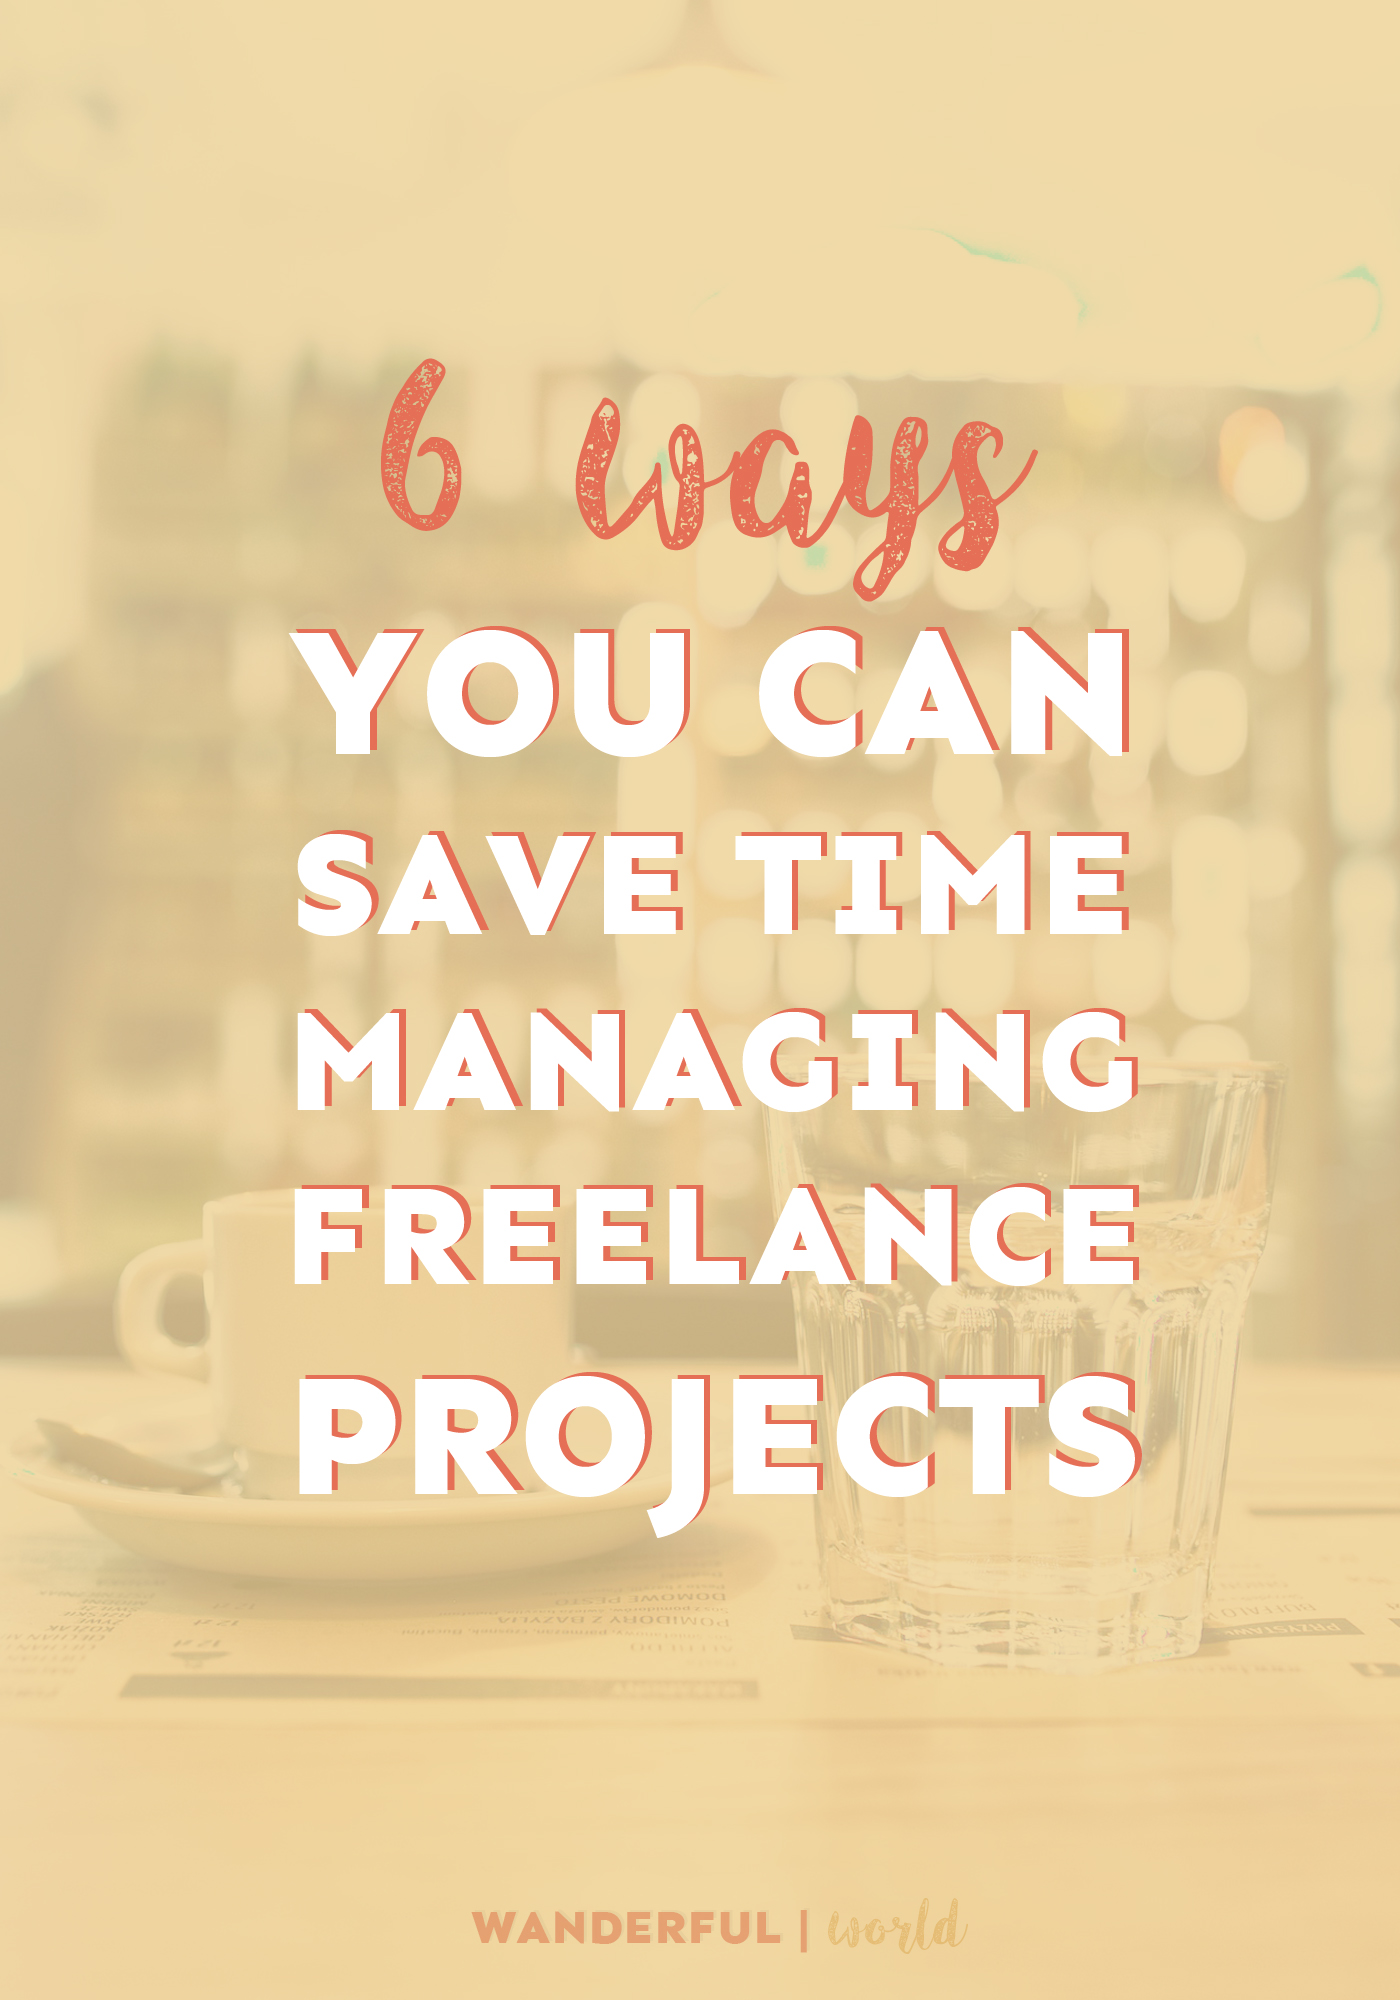 Want to save time managing freelance projects? Here are 6 ways you can do just that! 